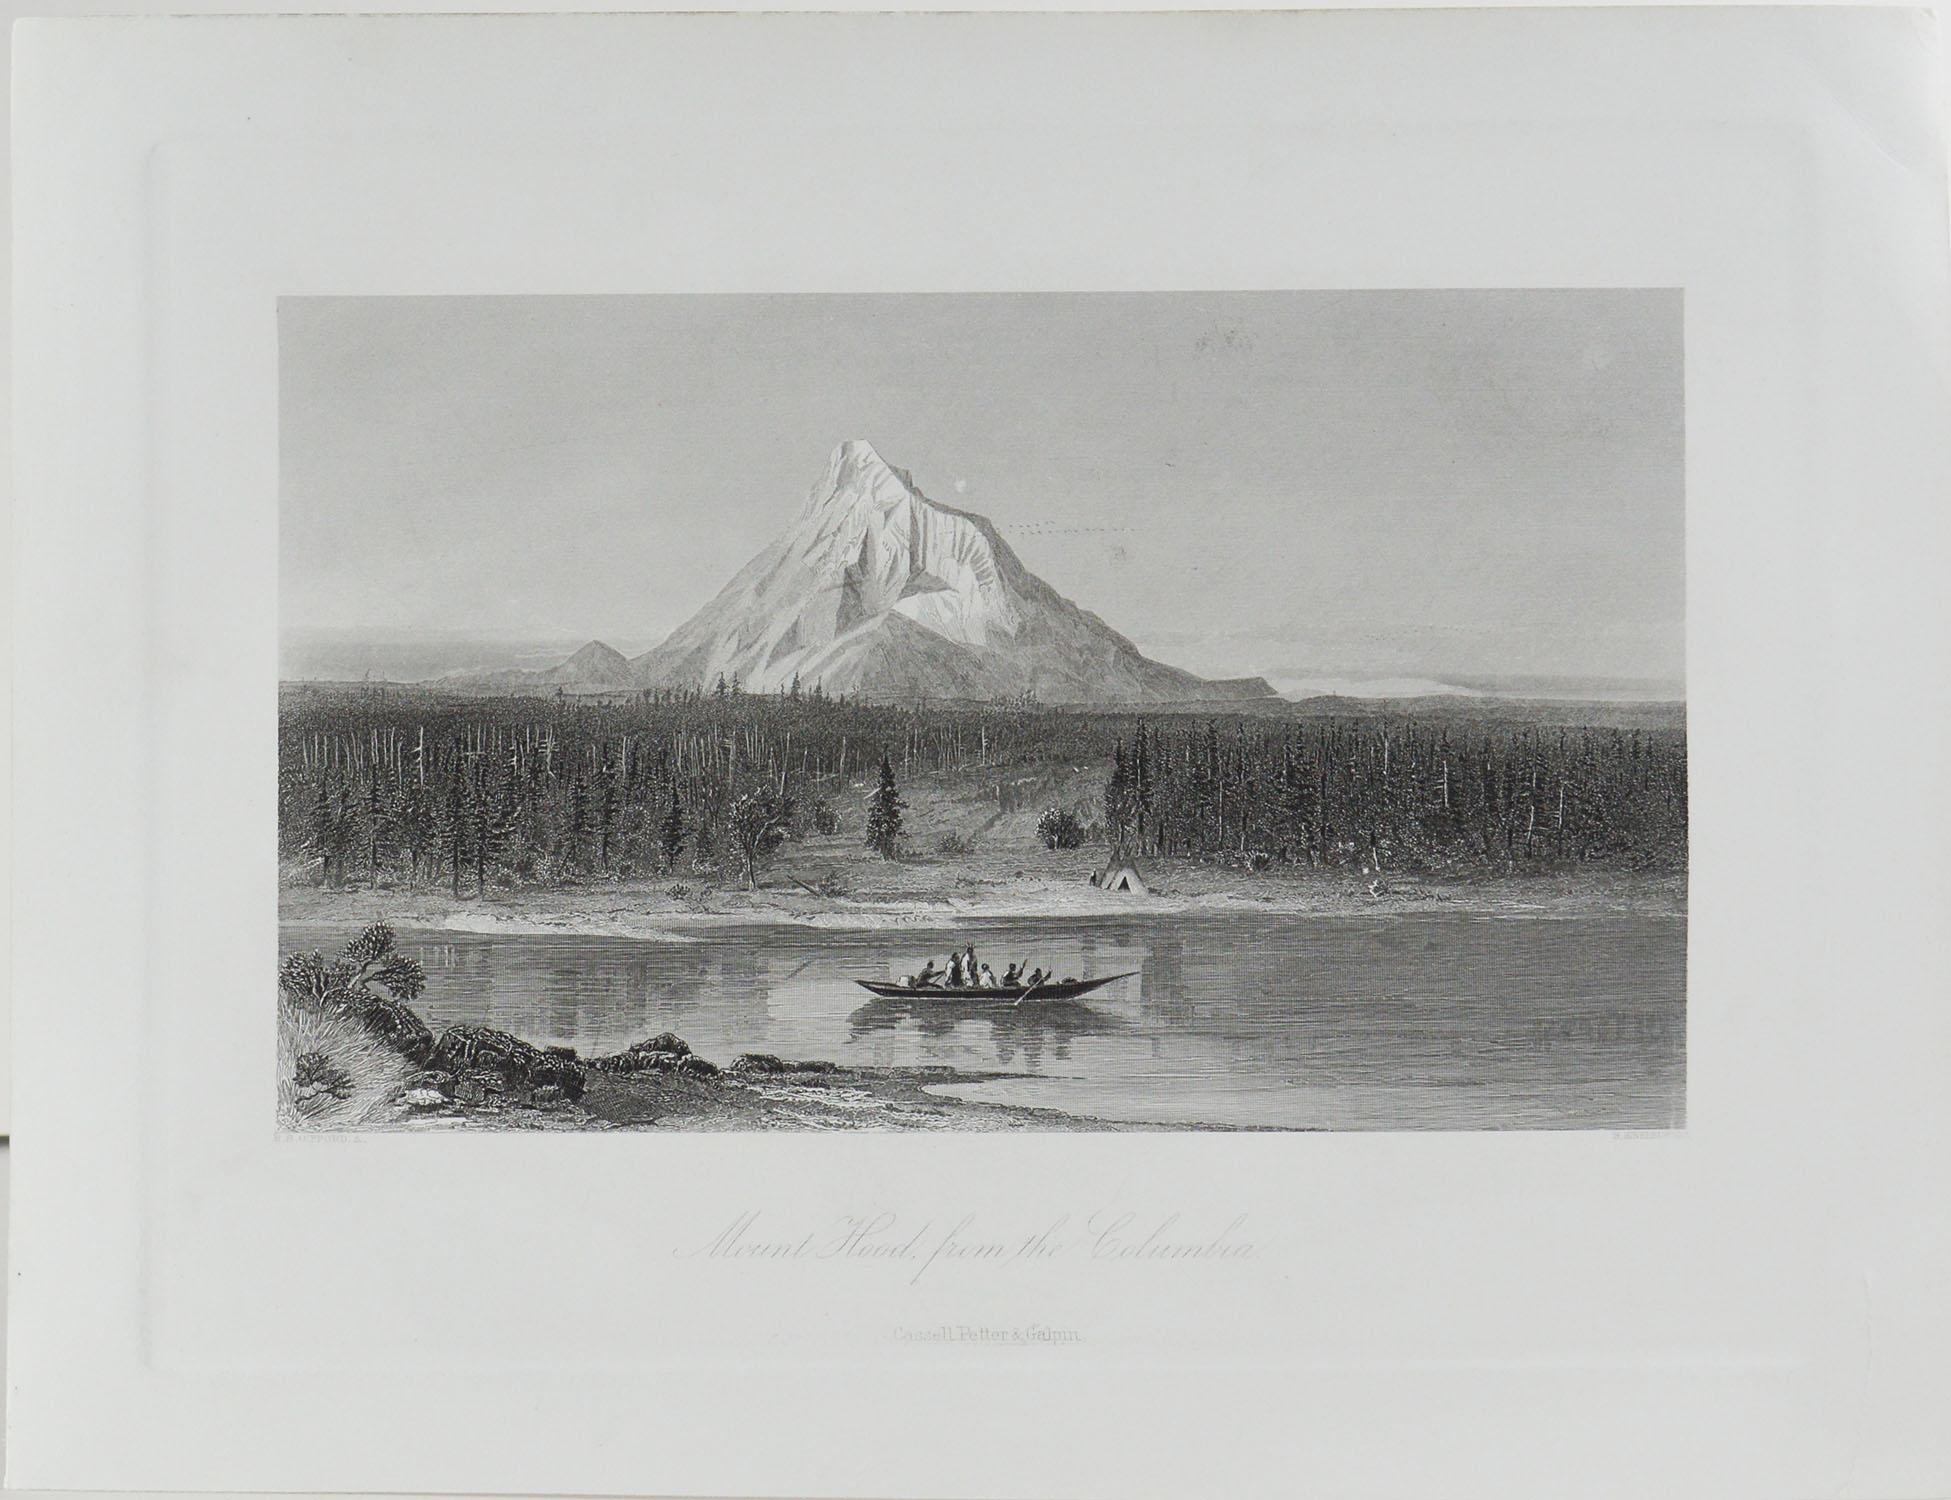 Great print of mount hood, oregon

Steel engraving after the original drawing by R.S.Gifford

Published circa 1870

Unframed.

Repair to a tear bottom right margin.
   